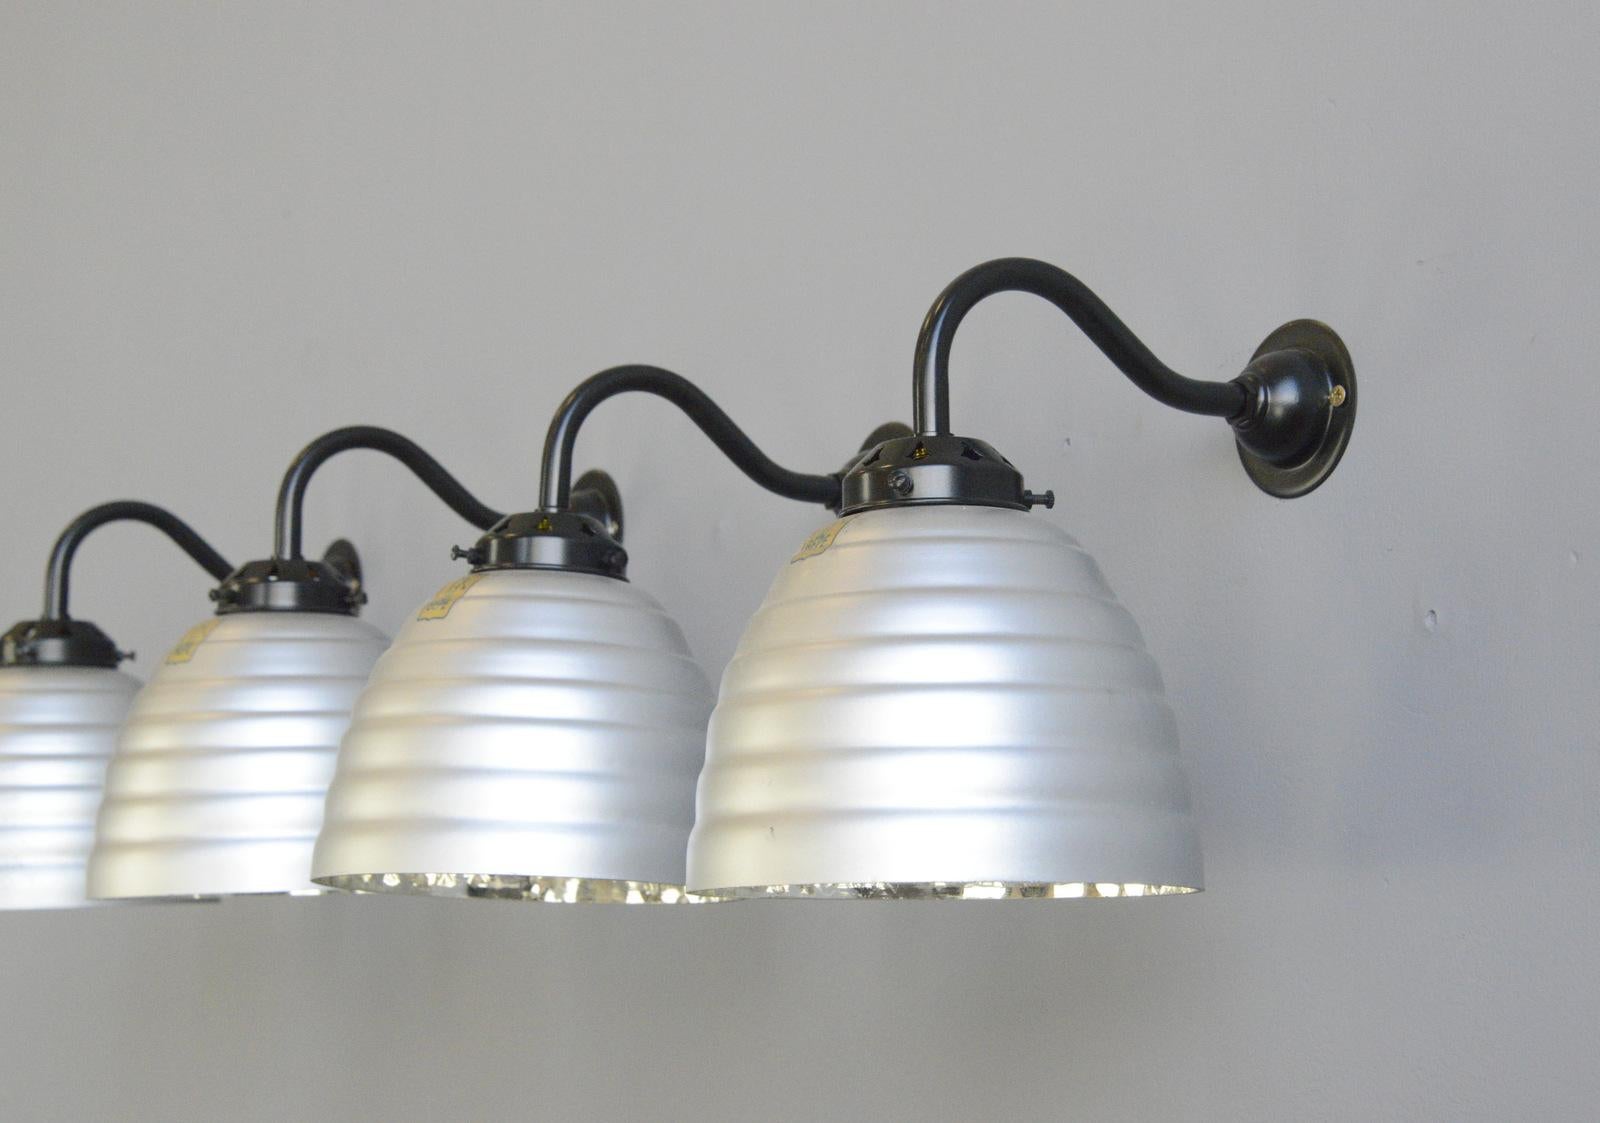 Large wall mounted mercury glass lights by Gepe, circa 1930s

- Price is per light 
- Mercury glass shade
- All branded Gepe 
- Takes E27 fitting bulbs
- Wires directly into a wall feed
- German, 1930s
- Measures: 18cm wide x 25cm deep x